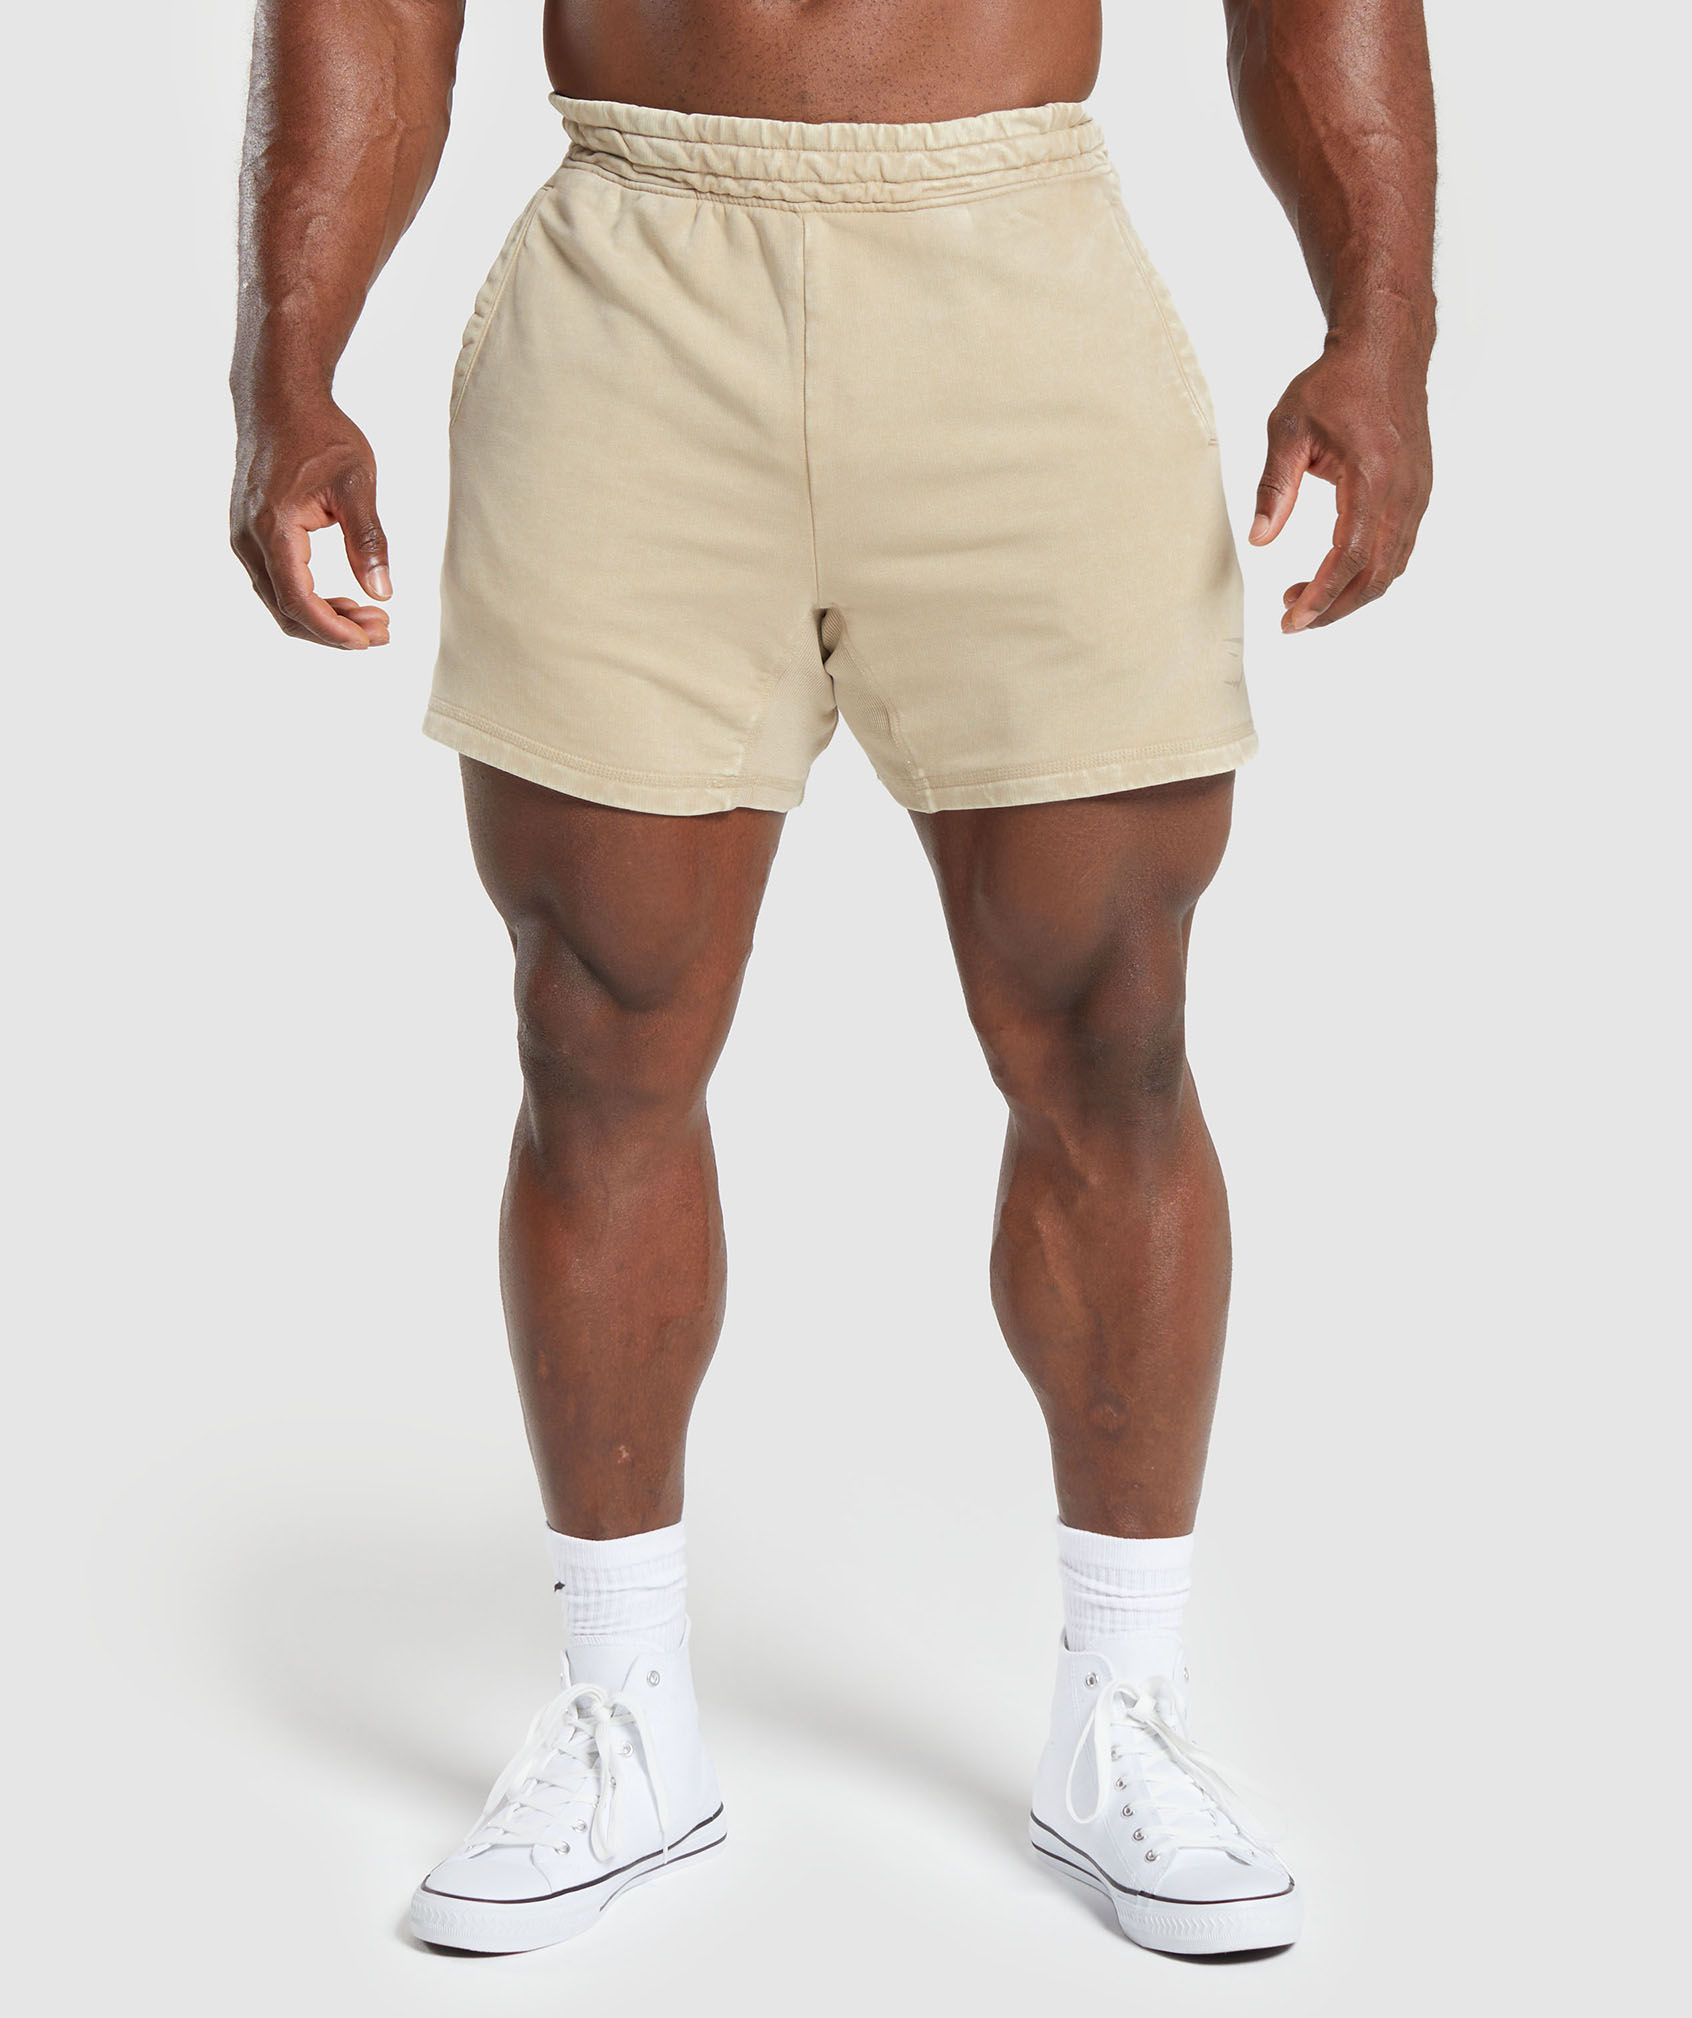 6 Of The Best Sweat Shorts For Men To Live In Every Weekend